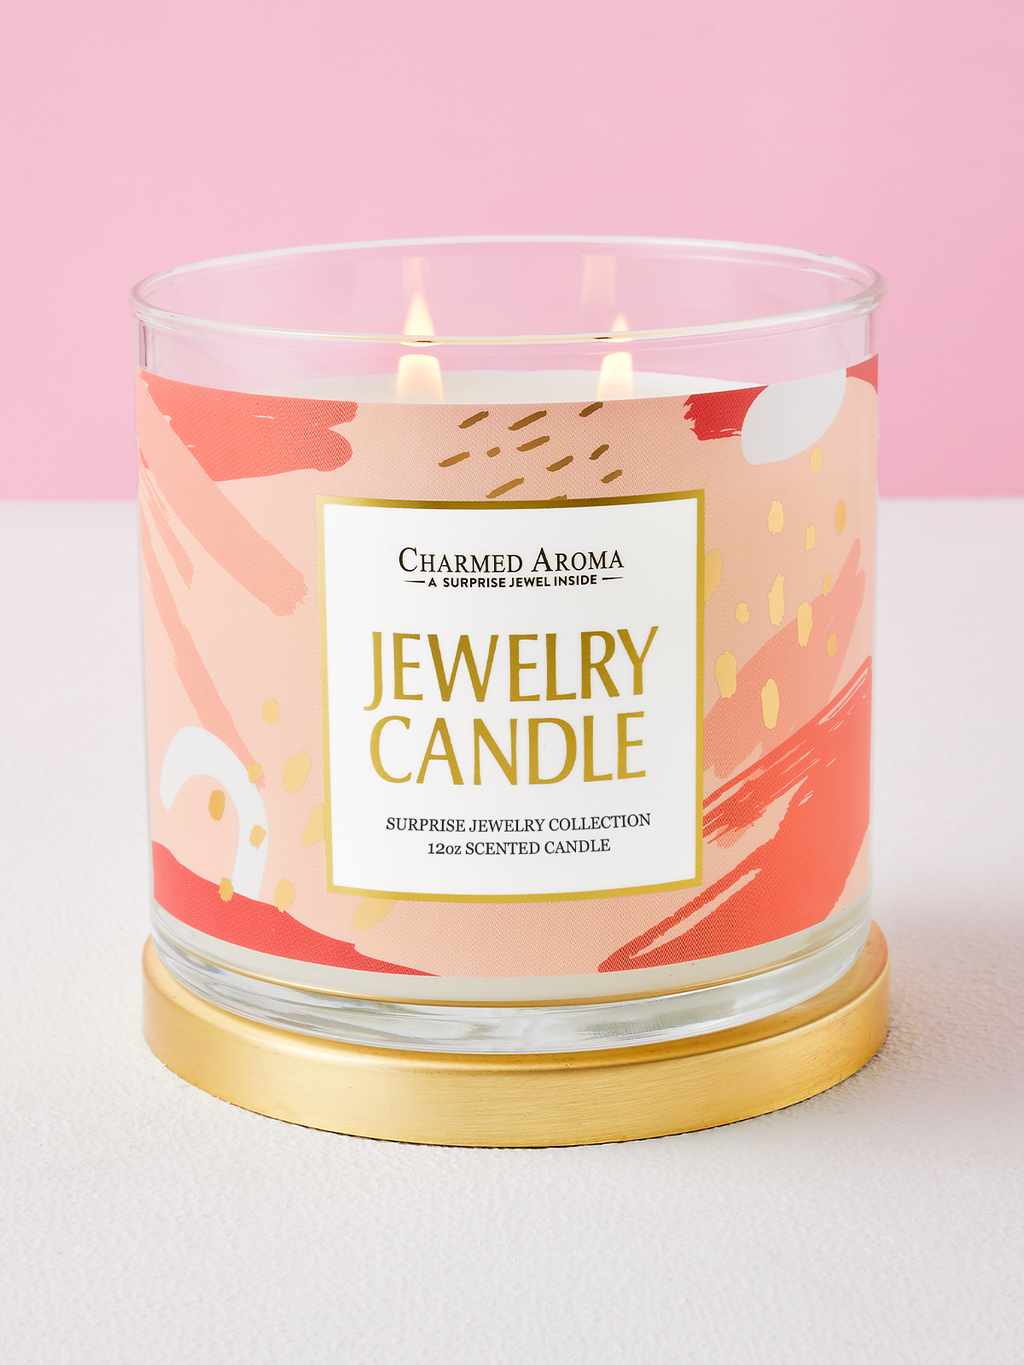 Jewelry Candles – Charmed Aroma